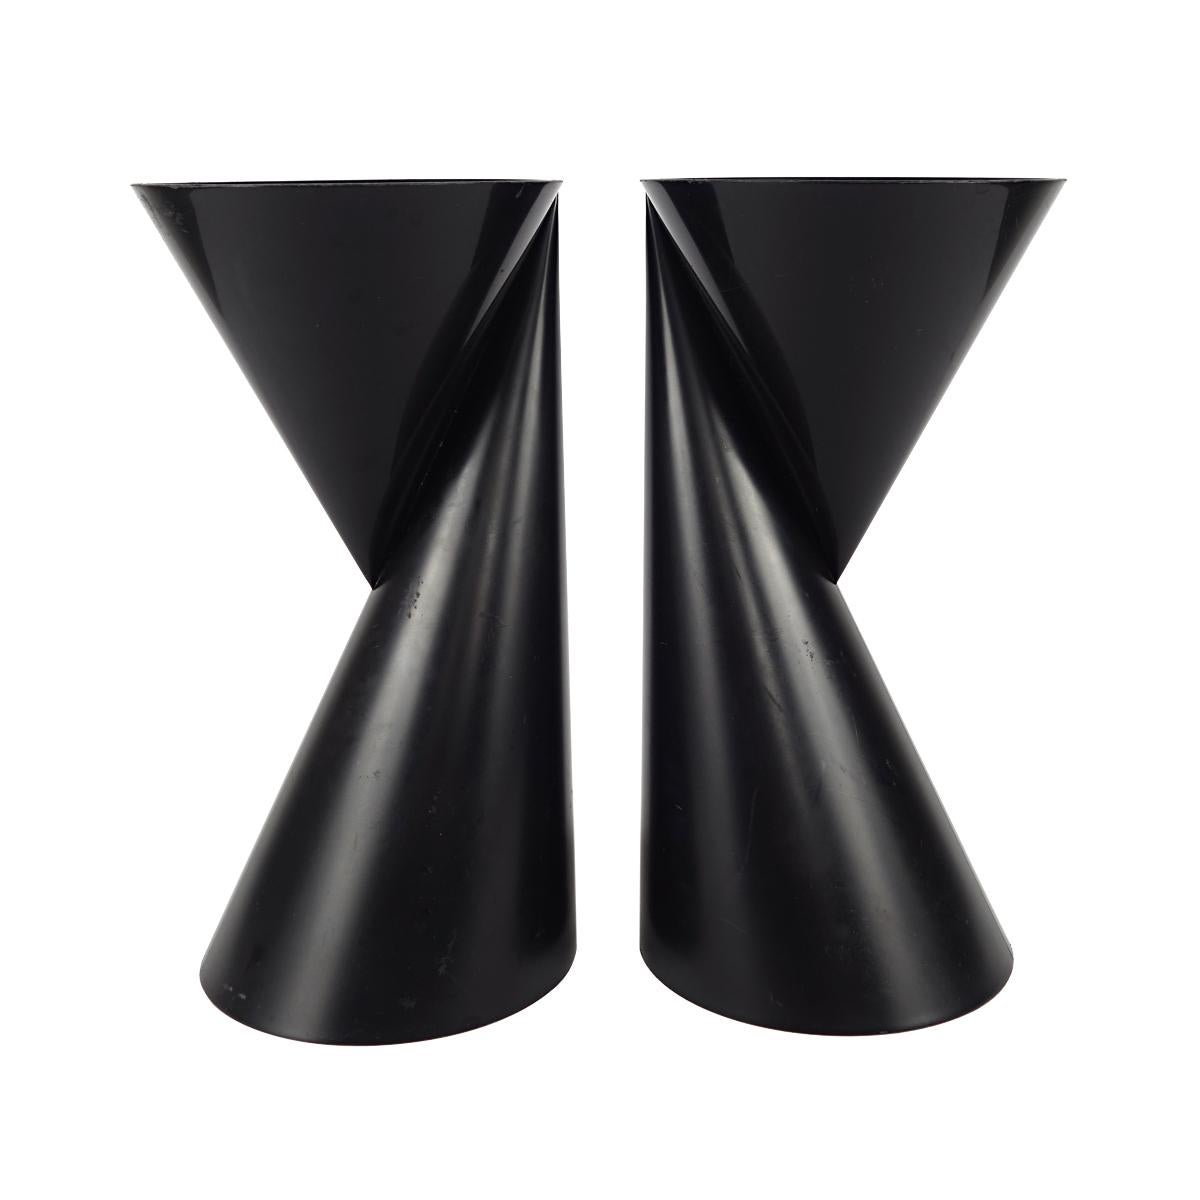 Set of two Dutch Design vases by Paul Baars, who designed them in 1997 in a true Space Age spirit. 
The ingenious concept ensures the versatility of the object. They can be used in two ways: for a large bouquet of flowers on one side and for a small